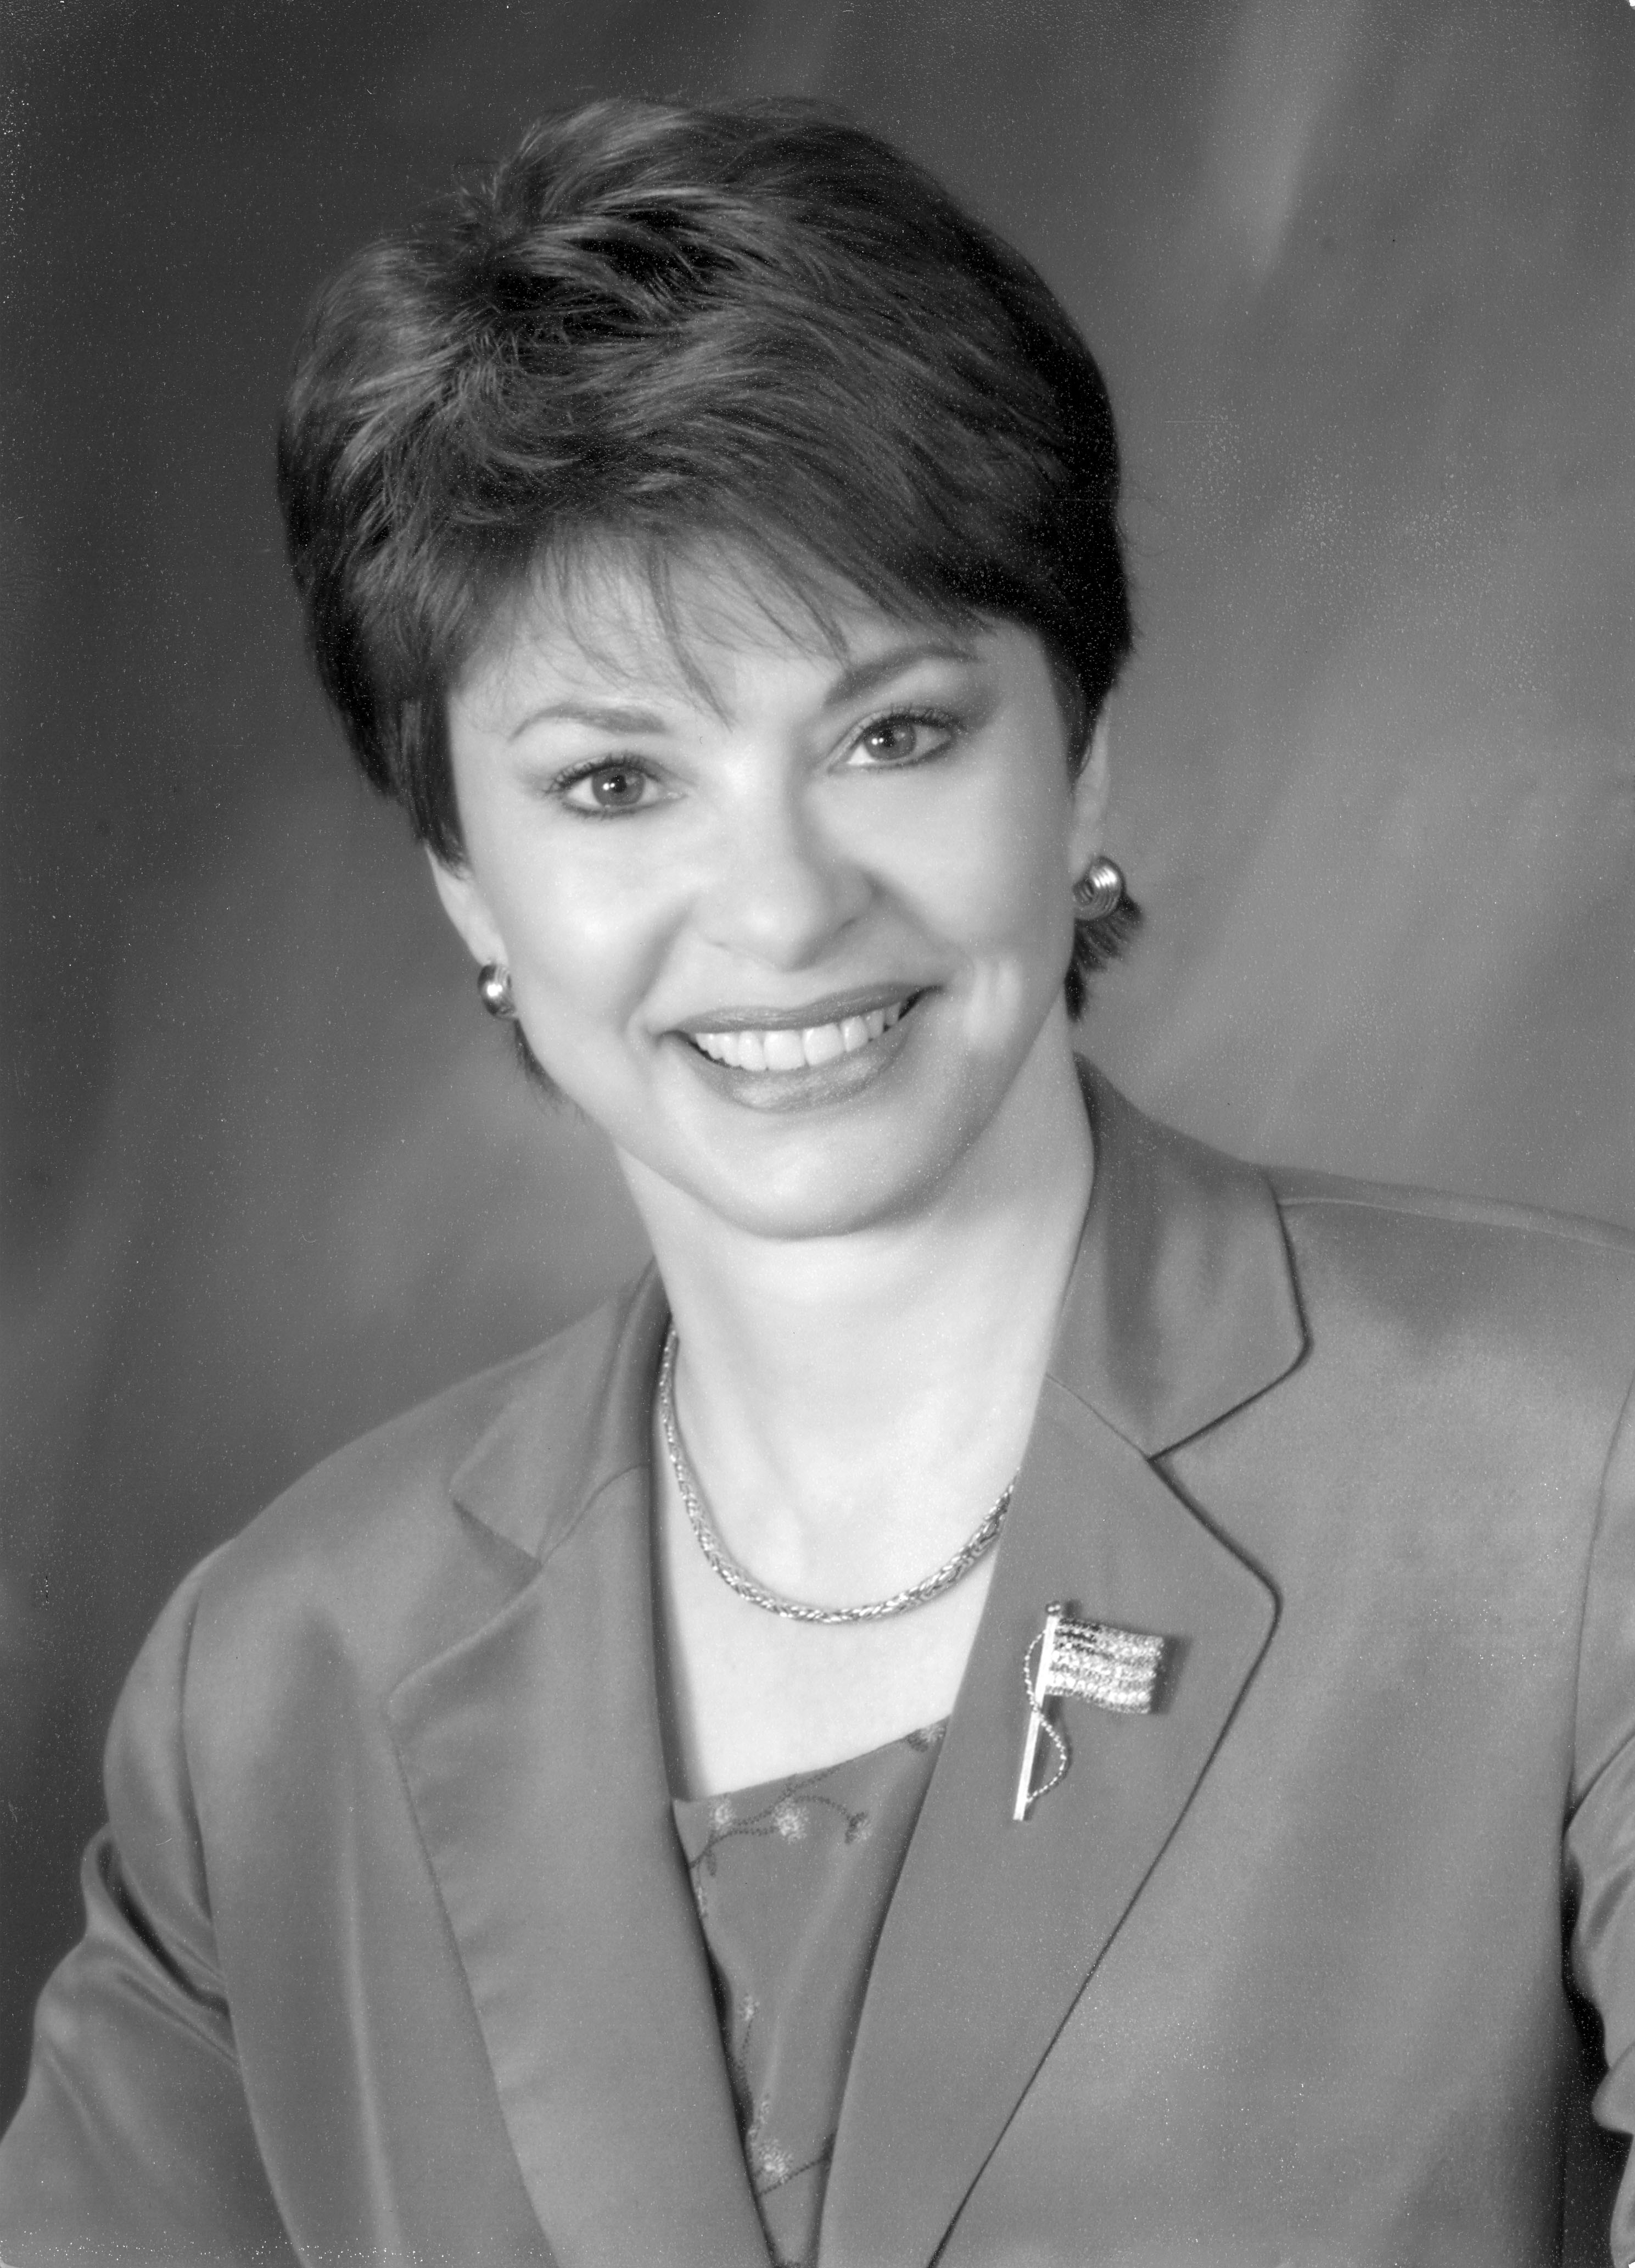 black and white portrait of a woman, wearing a suit jacket and american flag pin